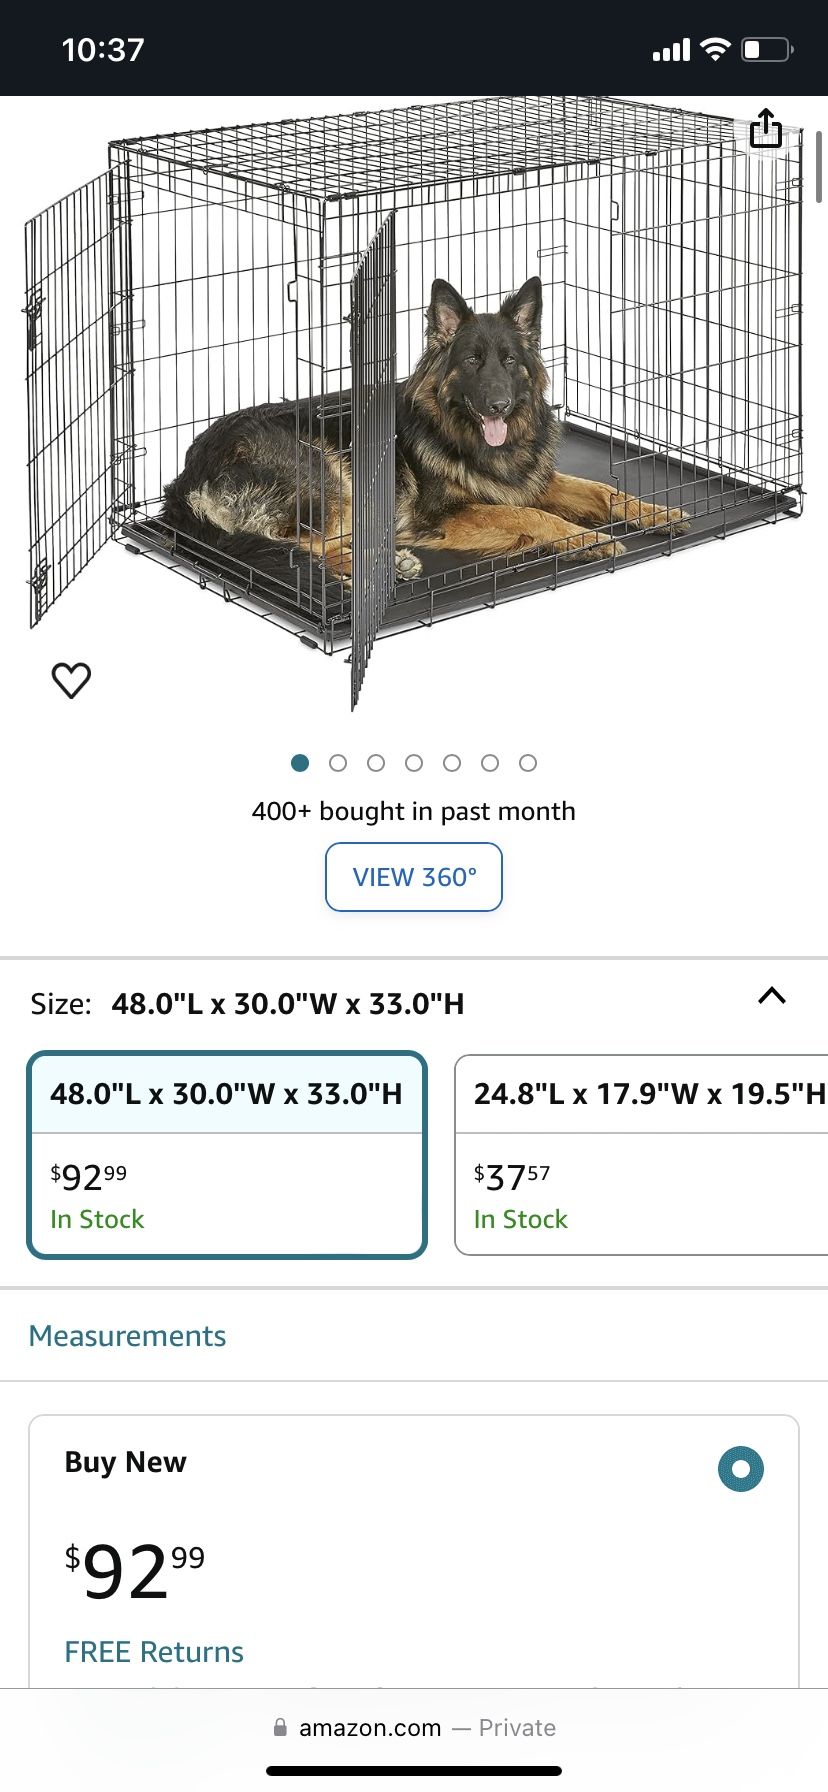 Large Dog Crate New 